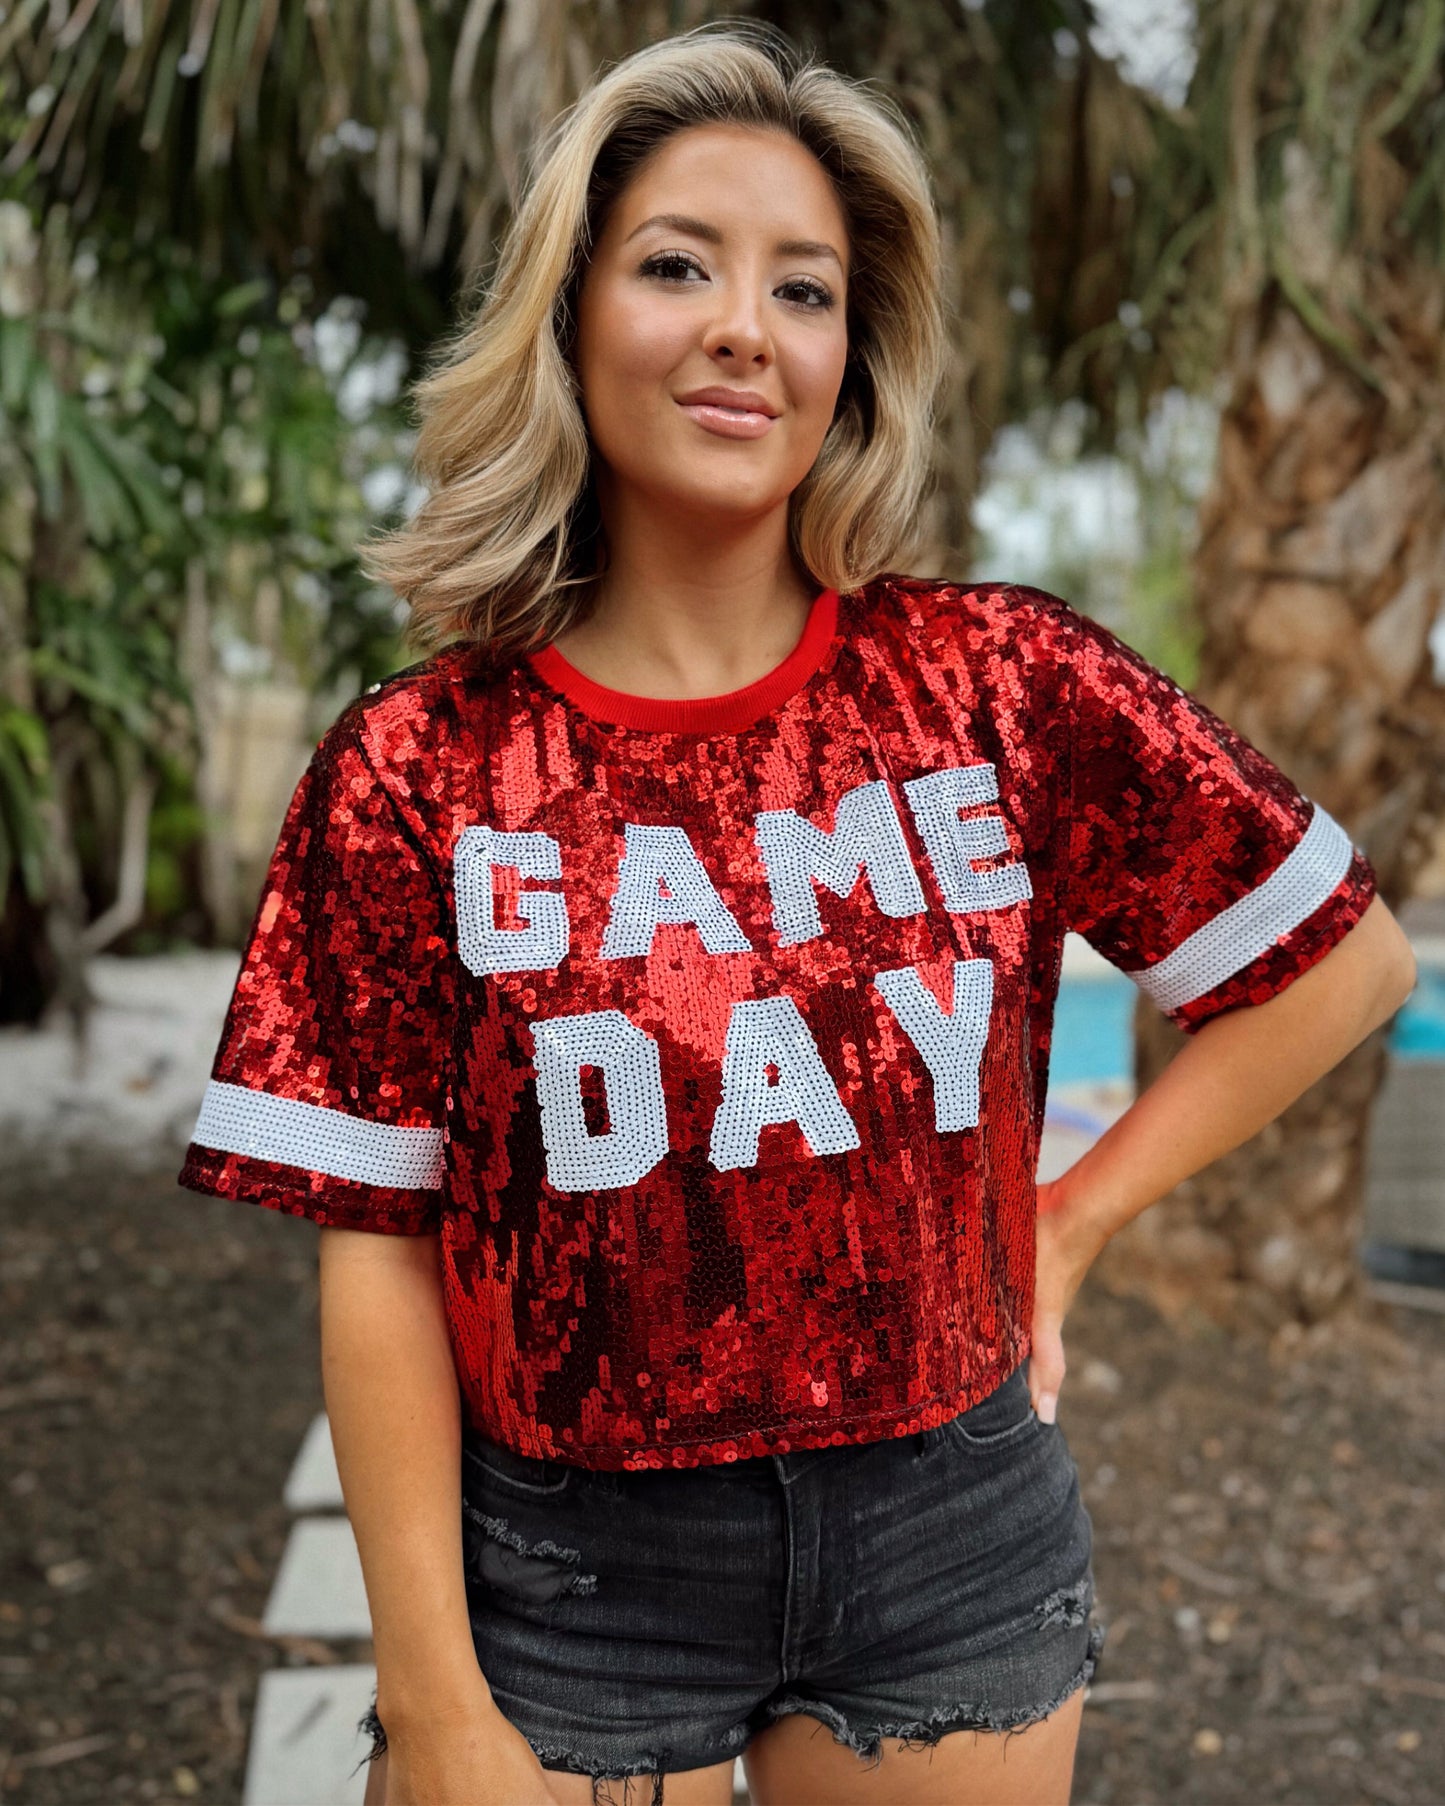 Red Sequin “GAME DAY” Crop